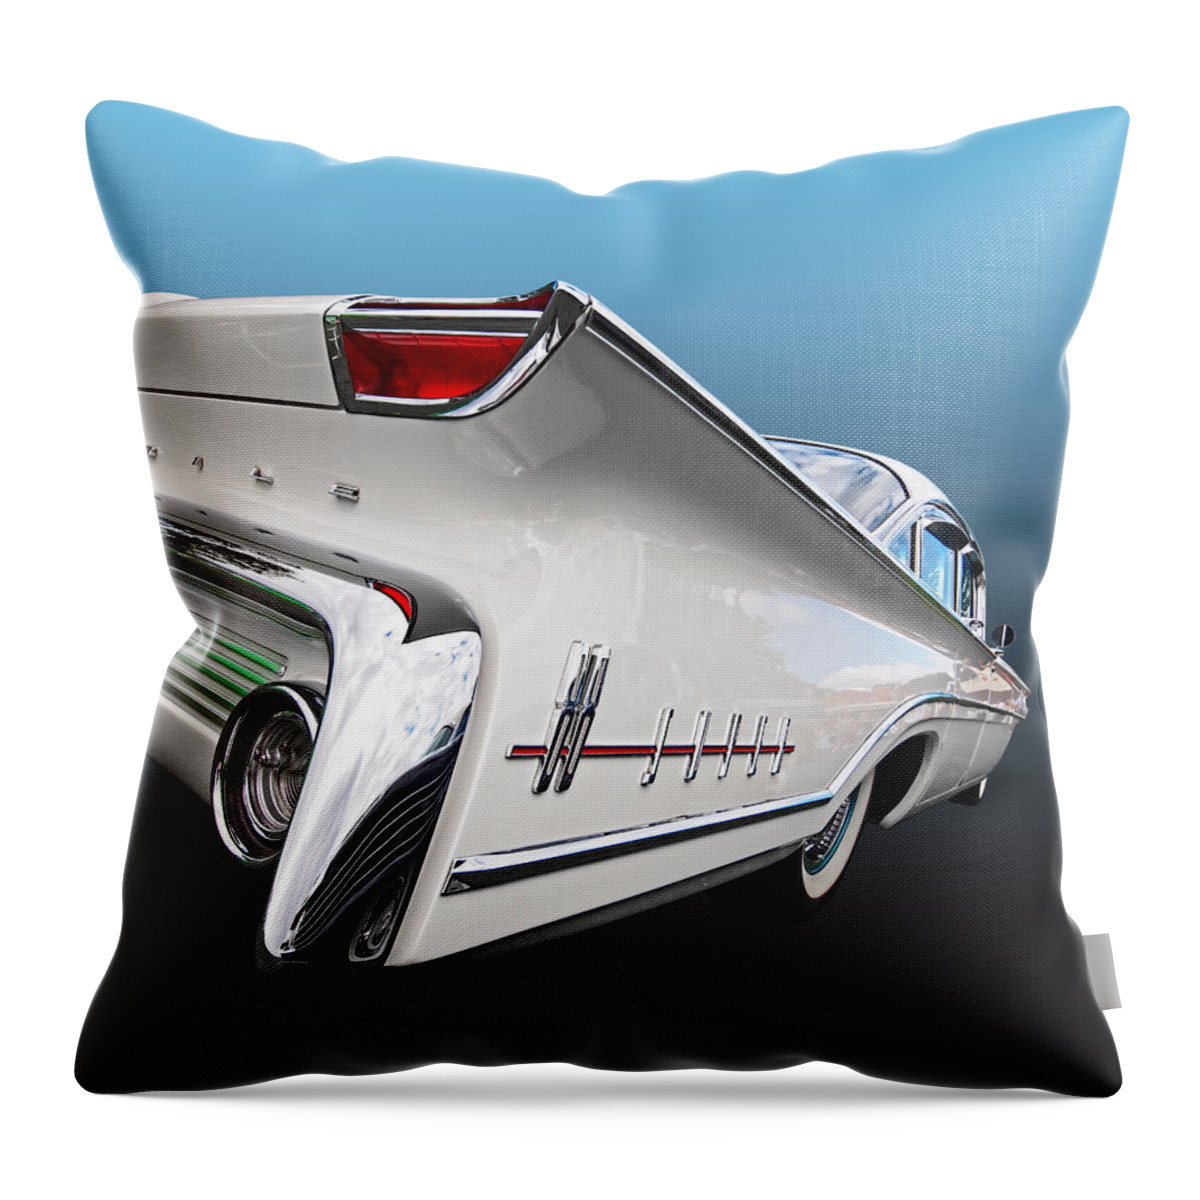 Oldsmobile Throw Pillow featuring the photograph Olds Sixties Style - Super 88 by Gill Billington